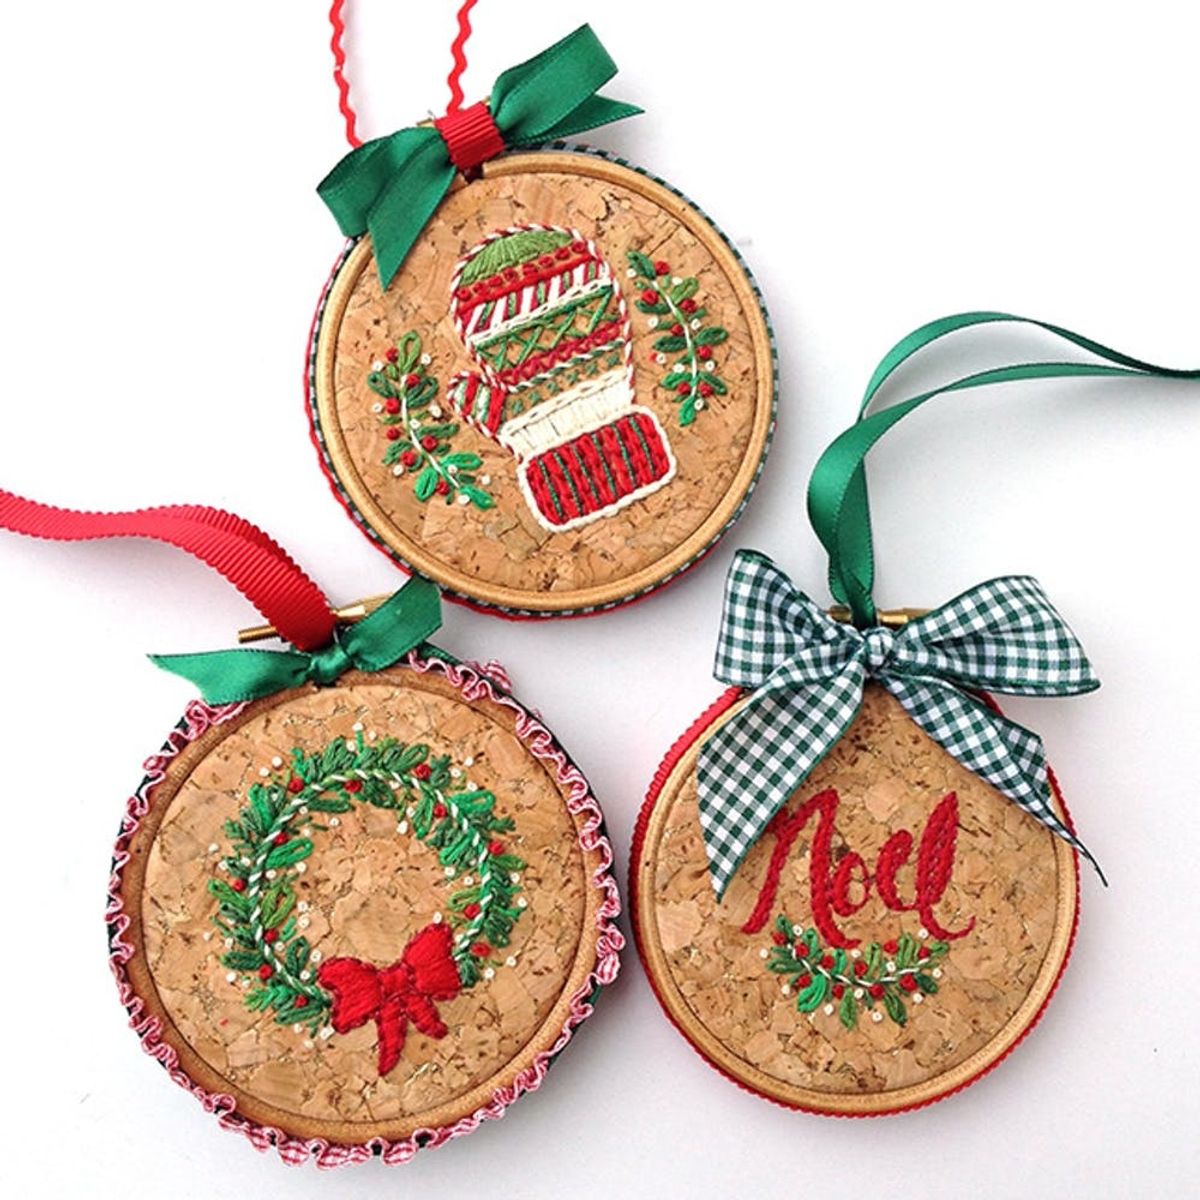 Make These Christmas Tree Ornaments With This FREE Project Guide